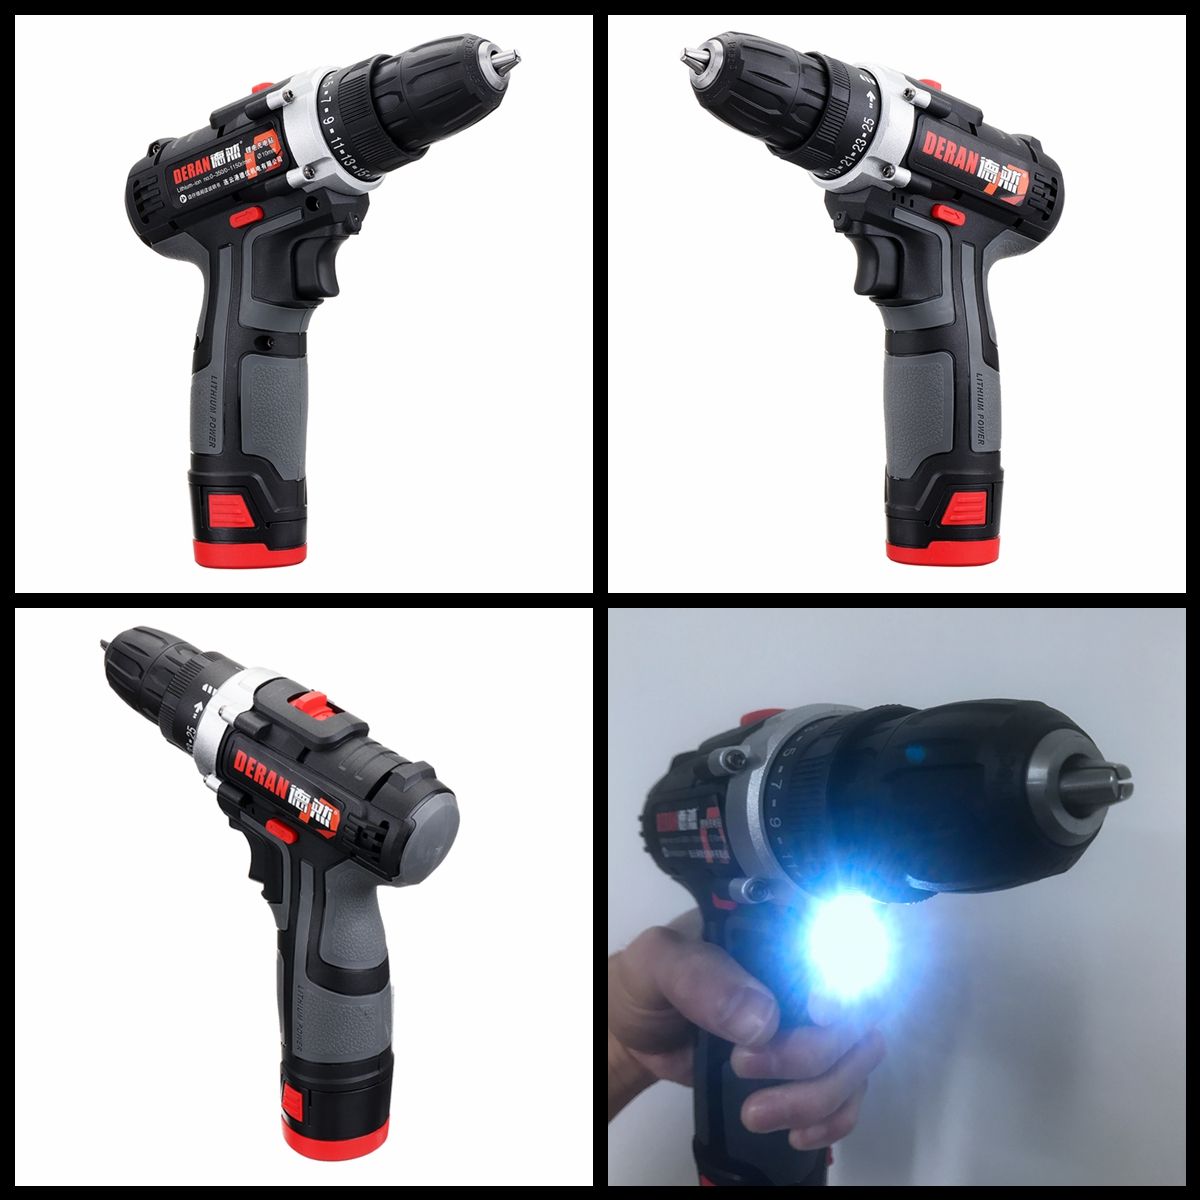 12V-Electric-Cordless-Power-Drill-Screwdriver-2-Speed-LED-Lighting-W-1or-2-Battery-1421394